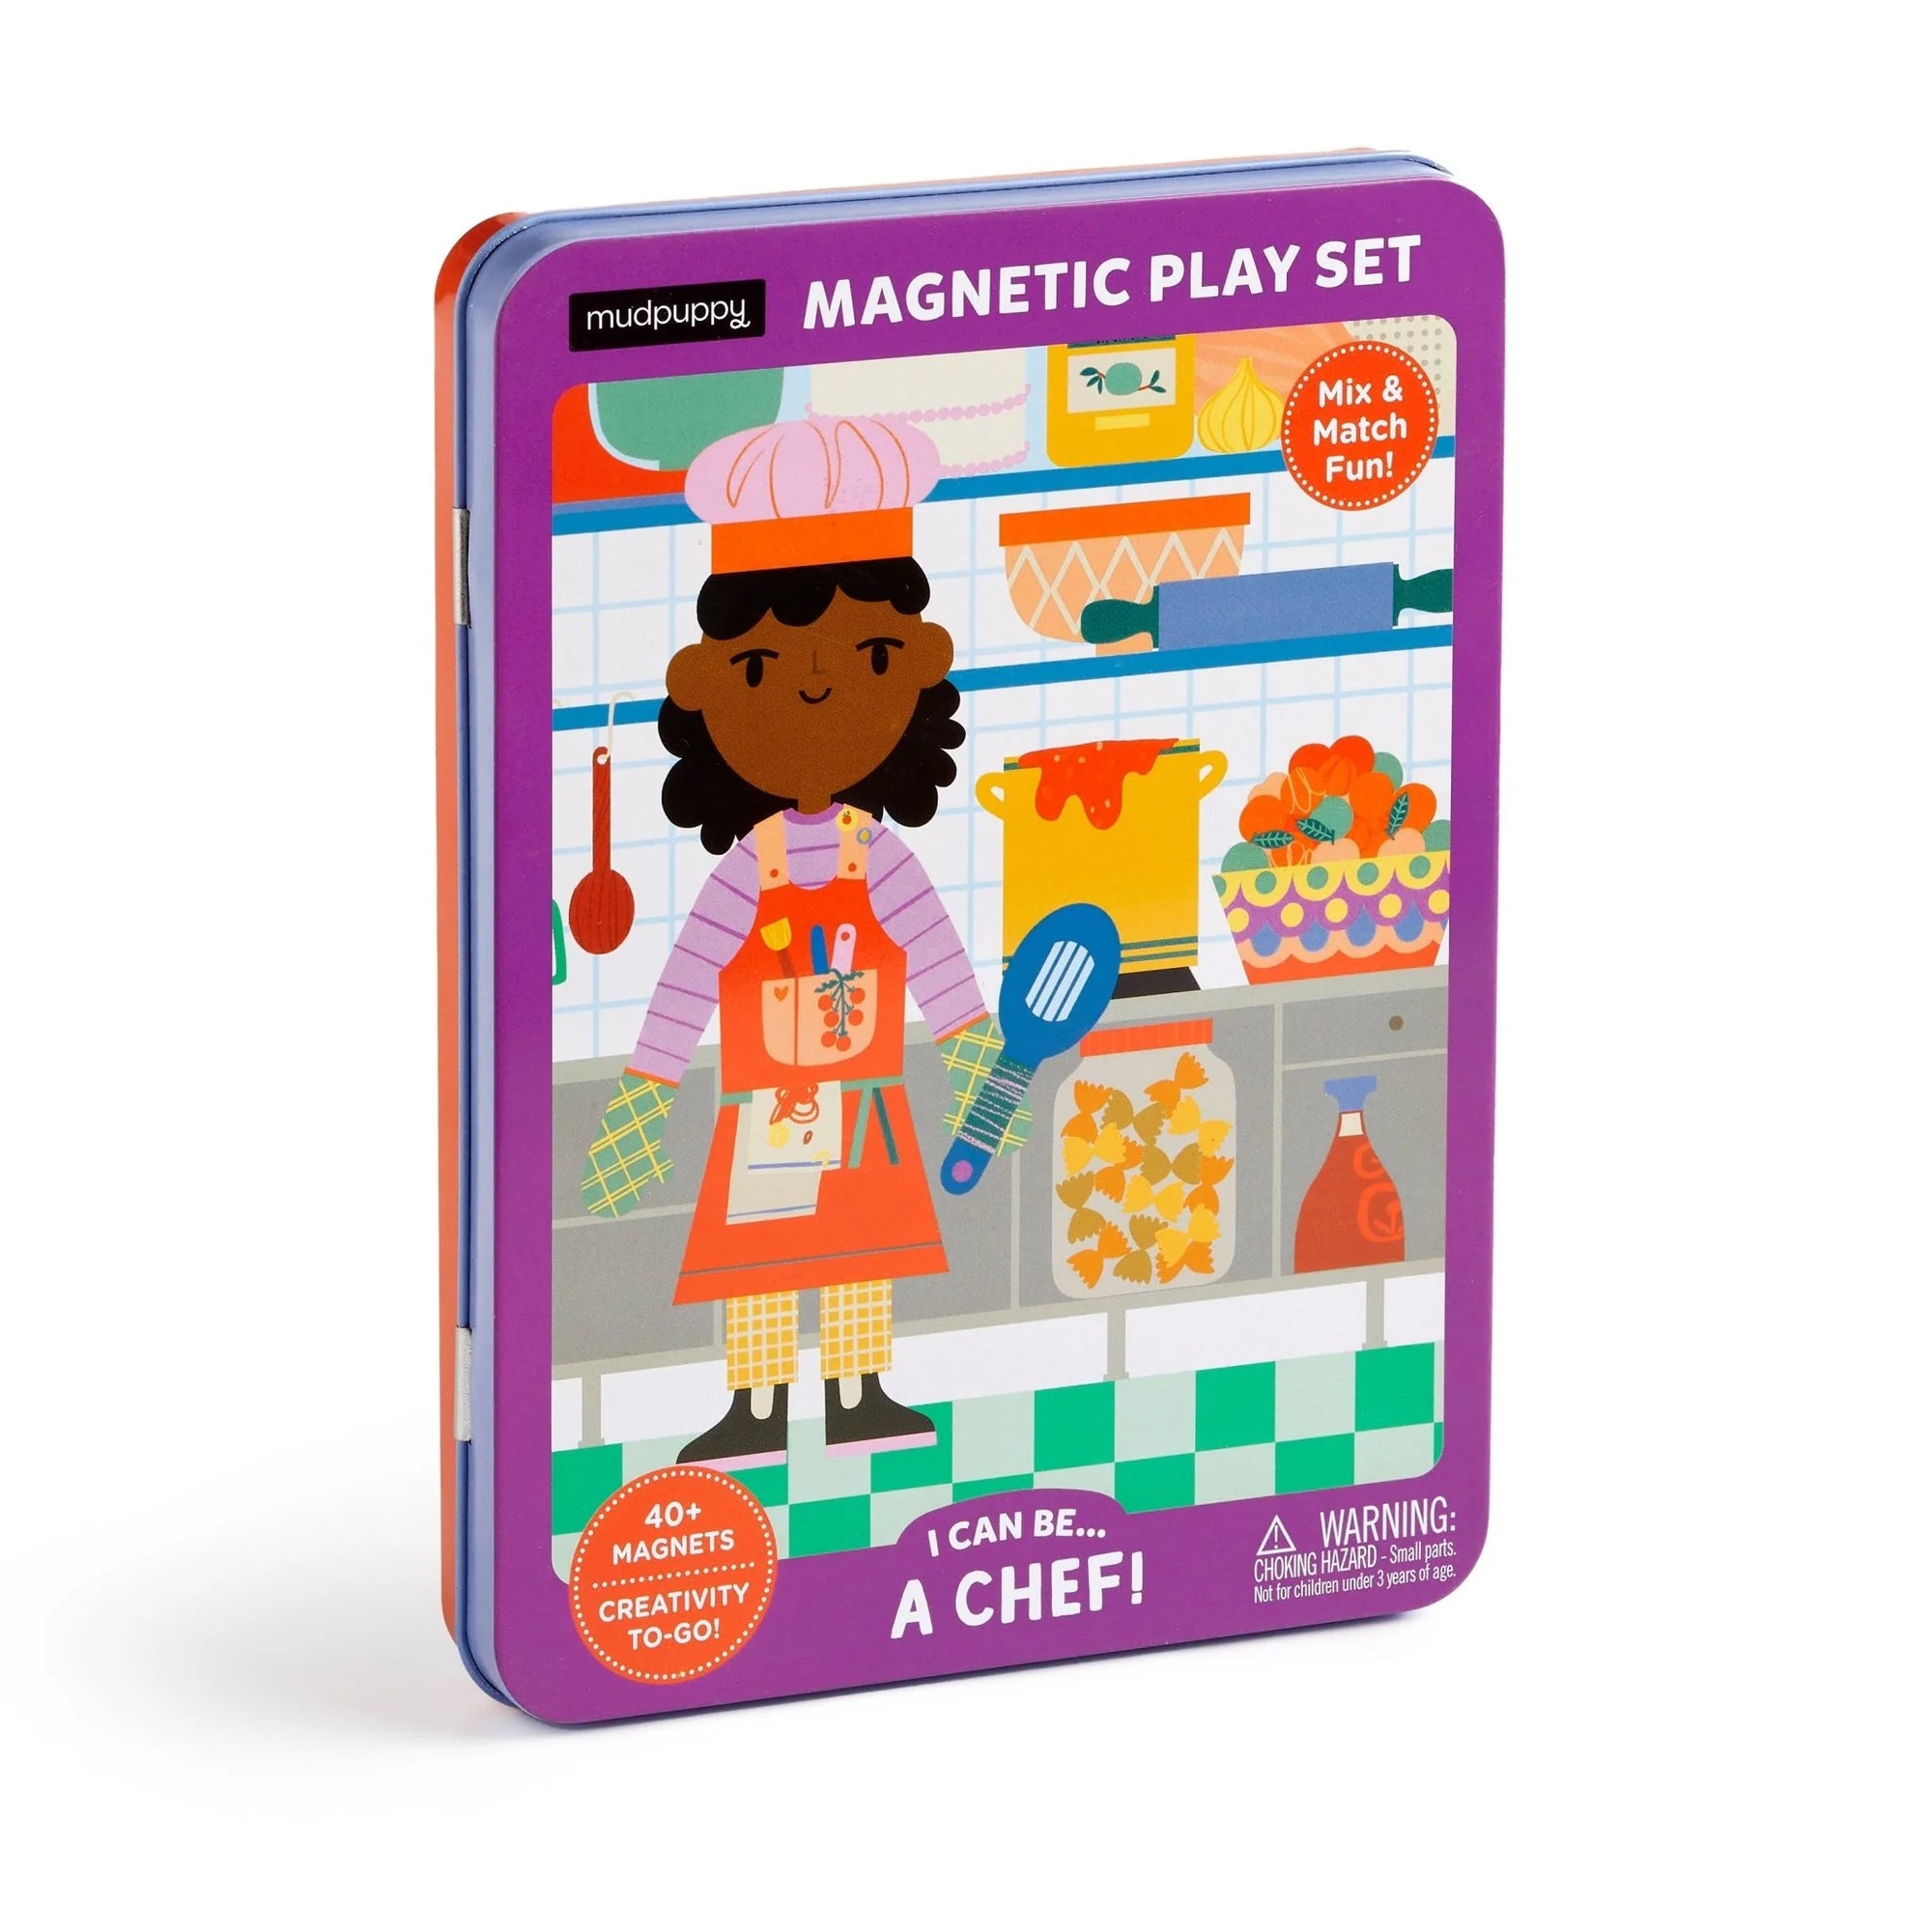 Mudpuppy Magnetic Play Set: I Can Be... A Chef!